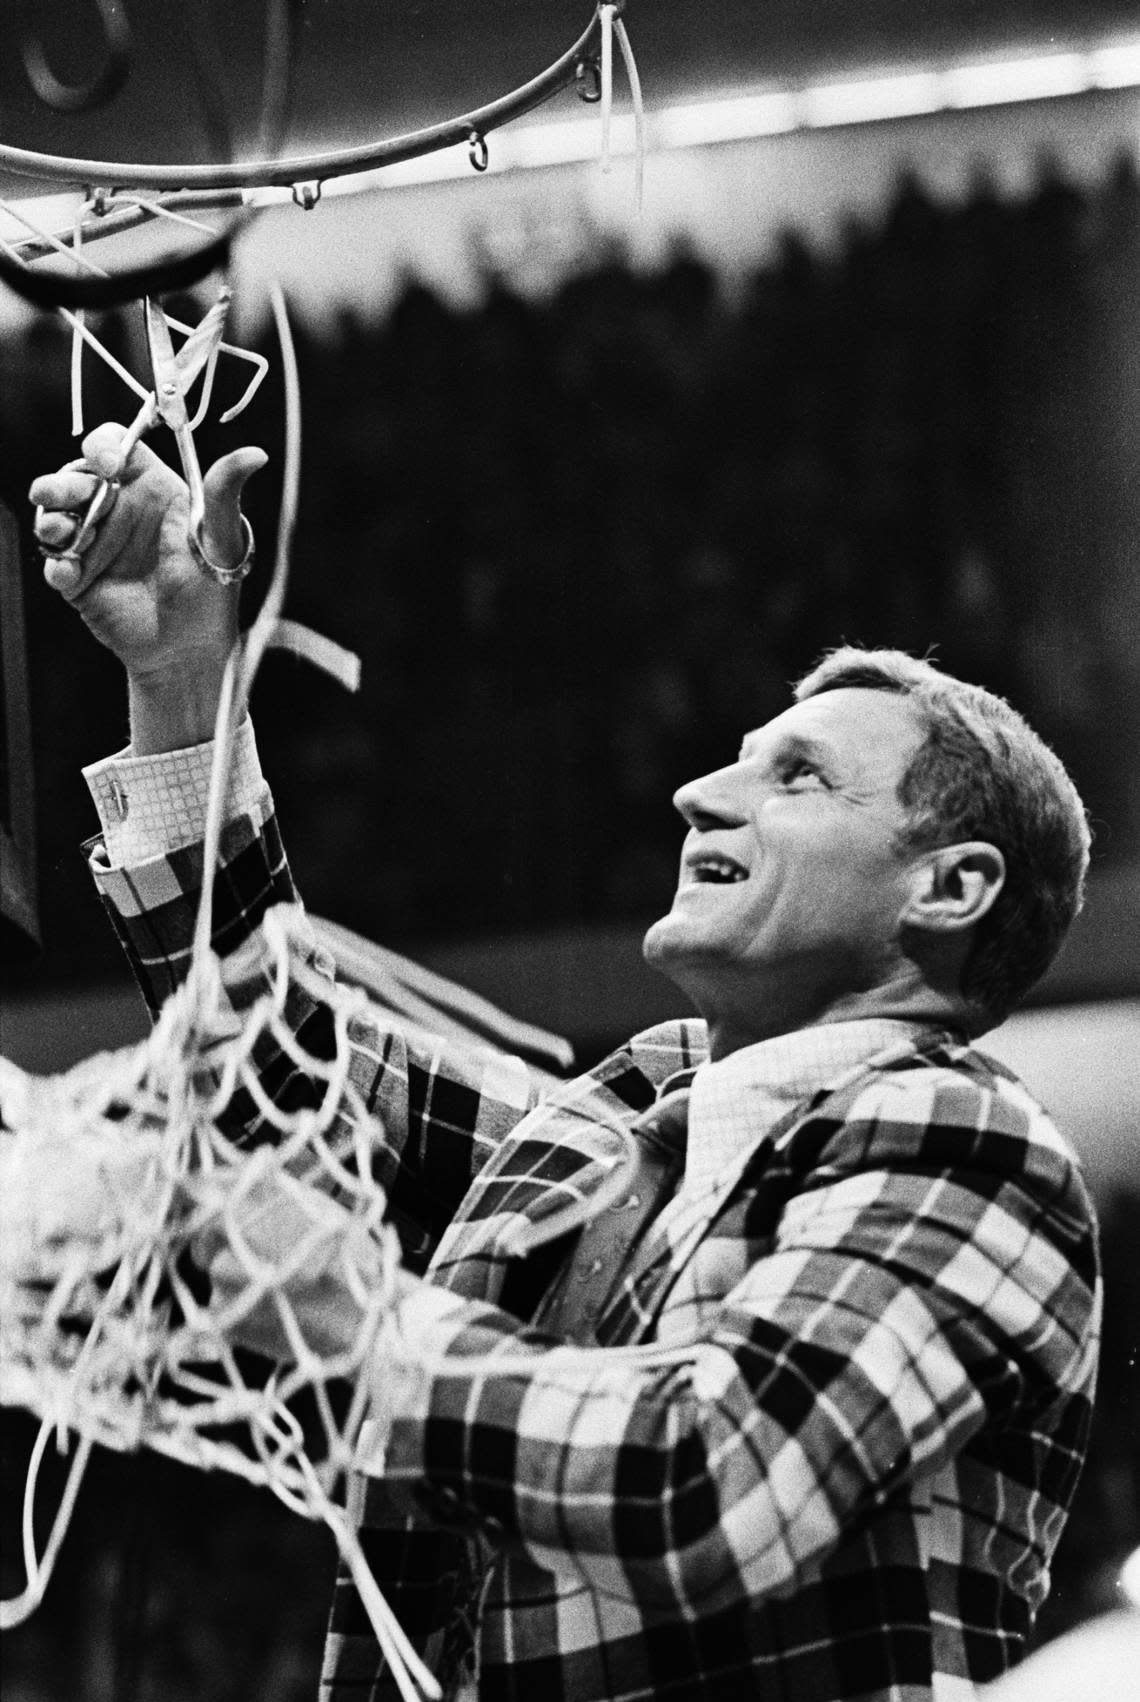 NC State head coach Norm Sloan cuts down the nets after his Wolfpack defeated Marquette to win the 1974 National Championship.